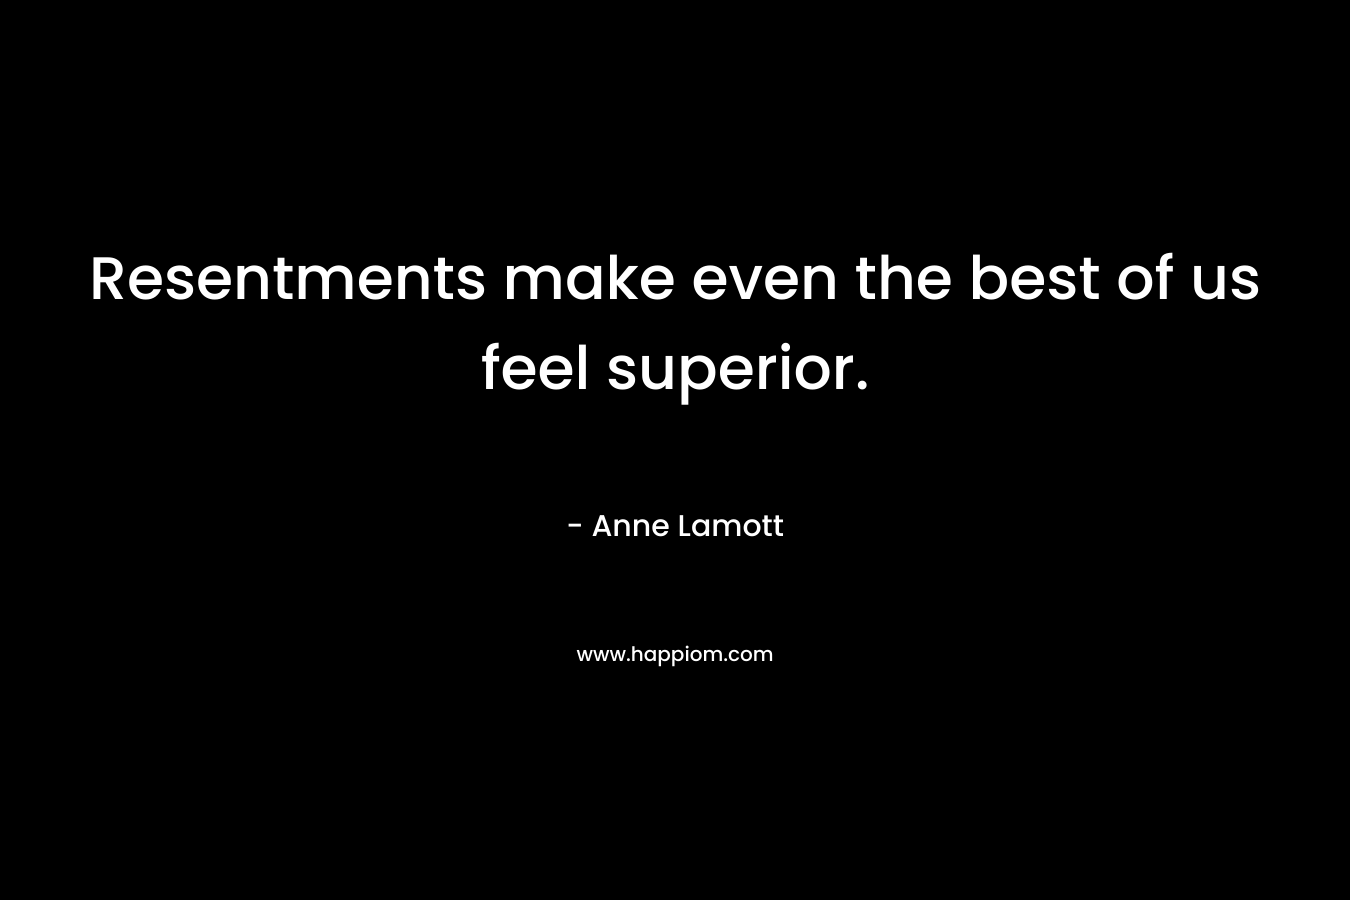 Resentments make even the best of us feel superior.